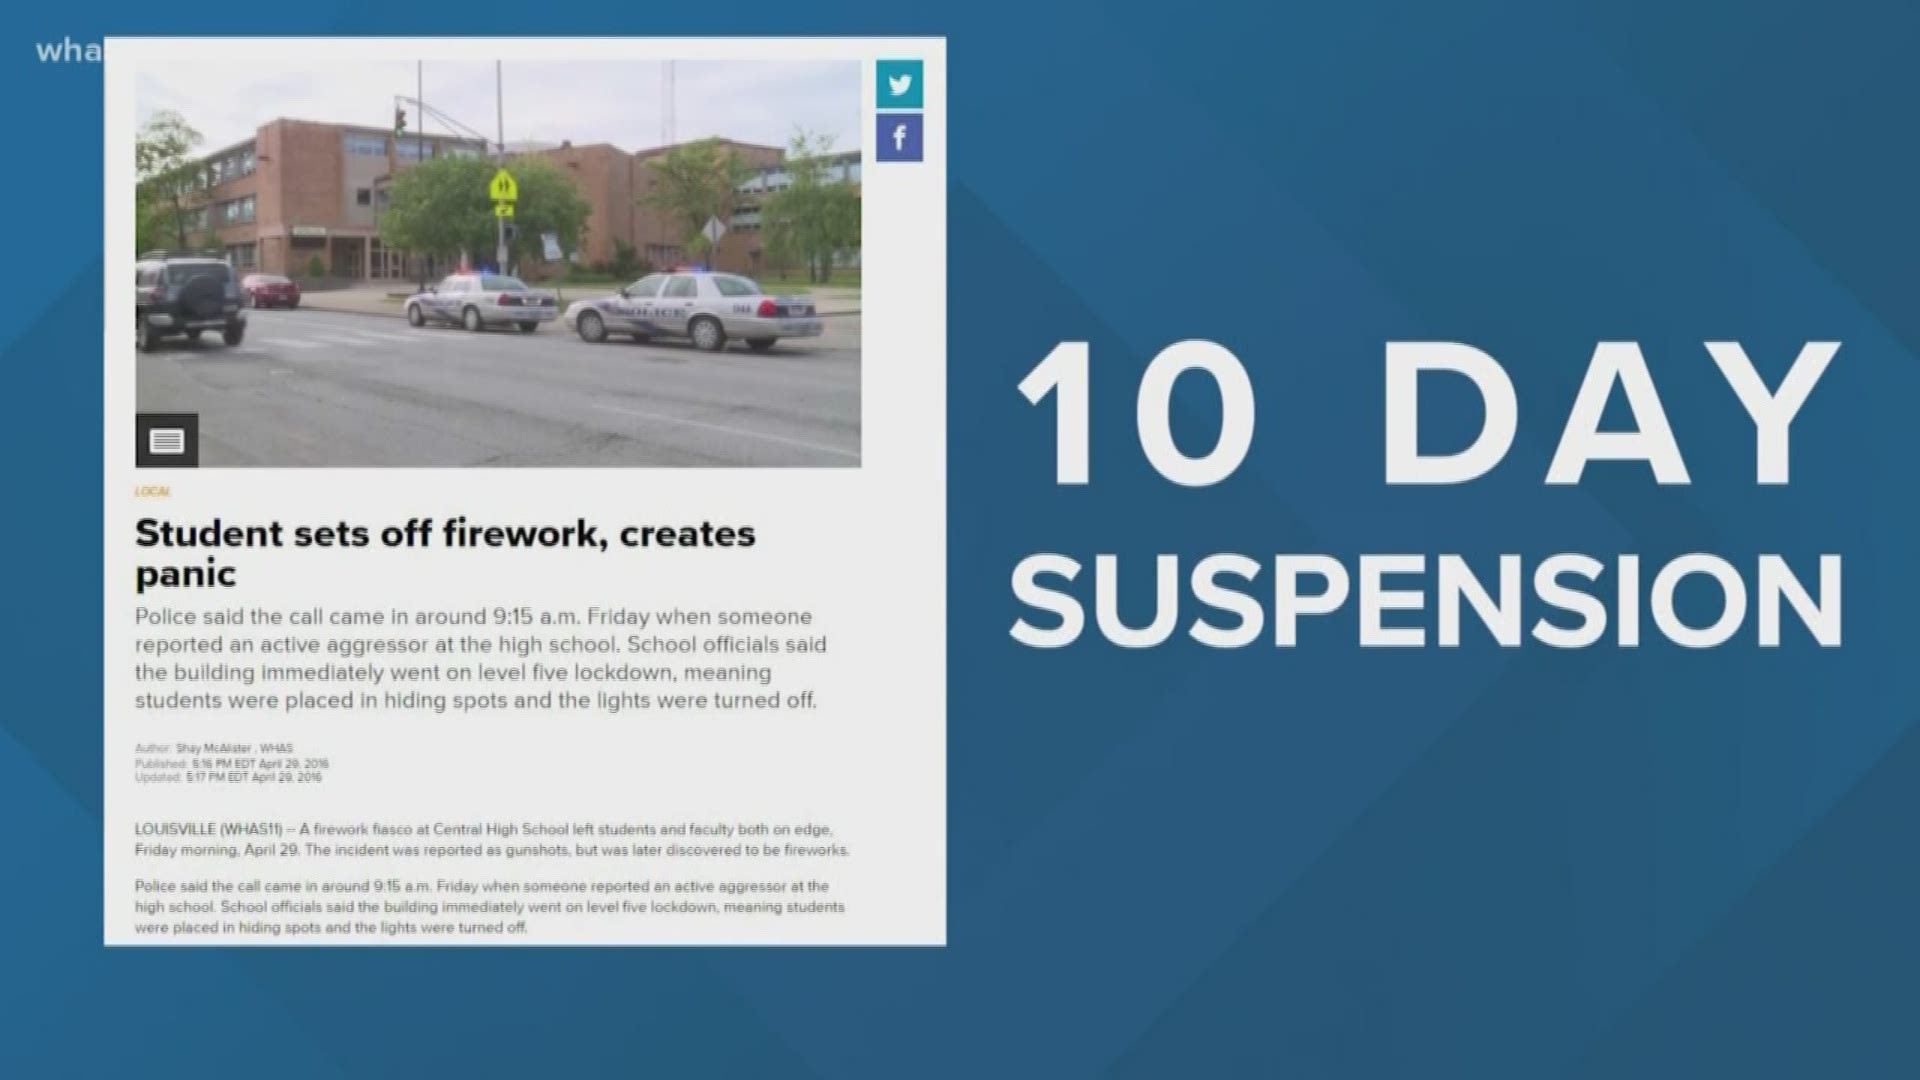 Should there be criminal charges for fireworks inside a school causing a scare? JCPS typically handles the investigation, with former cases seeing students get up to a 10 day suspension.